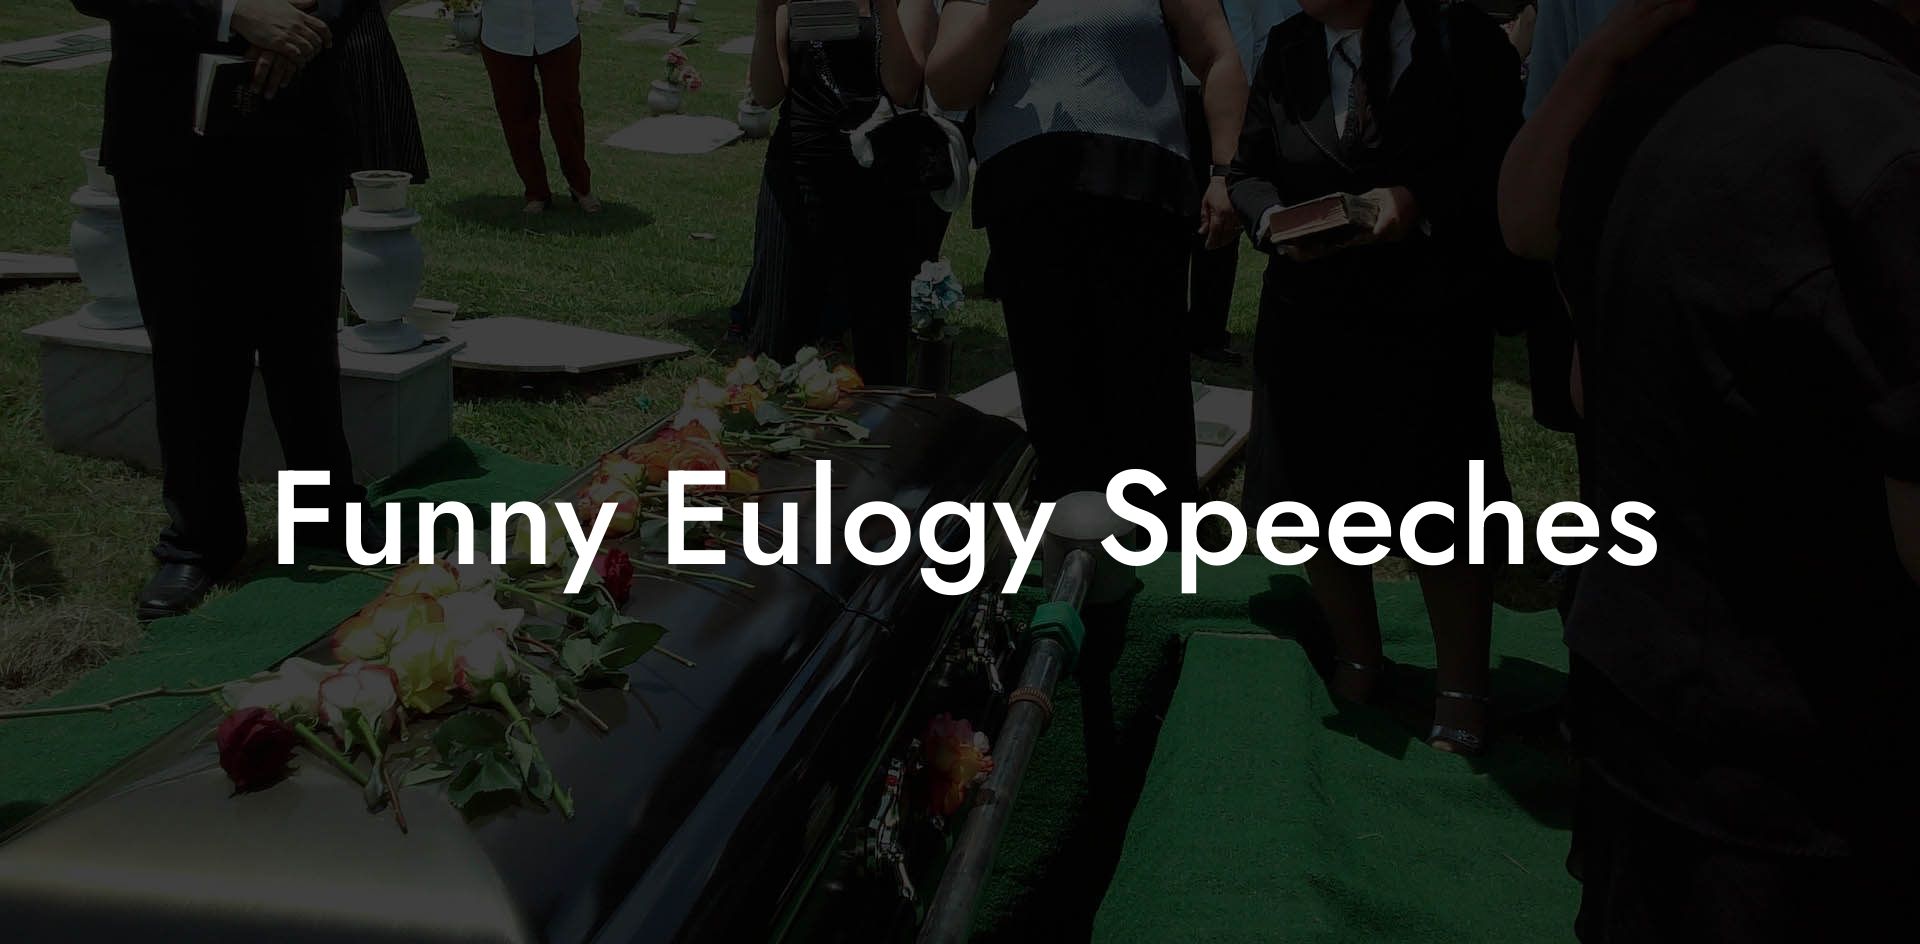 Funny Eulogy Speeches